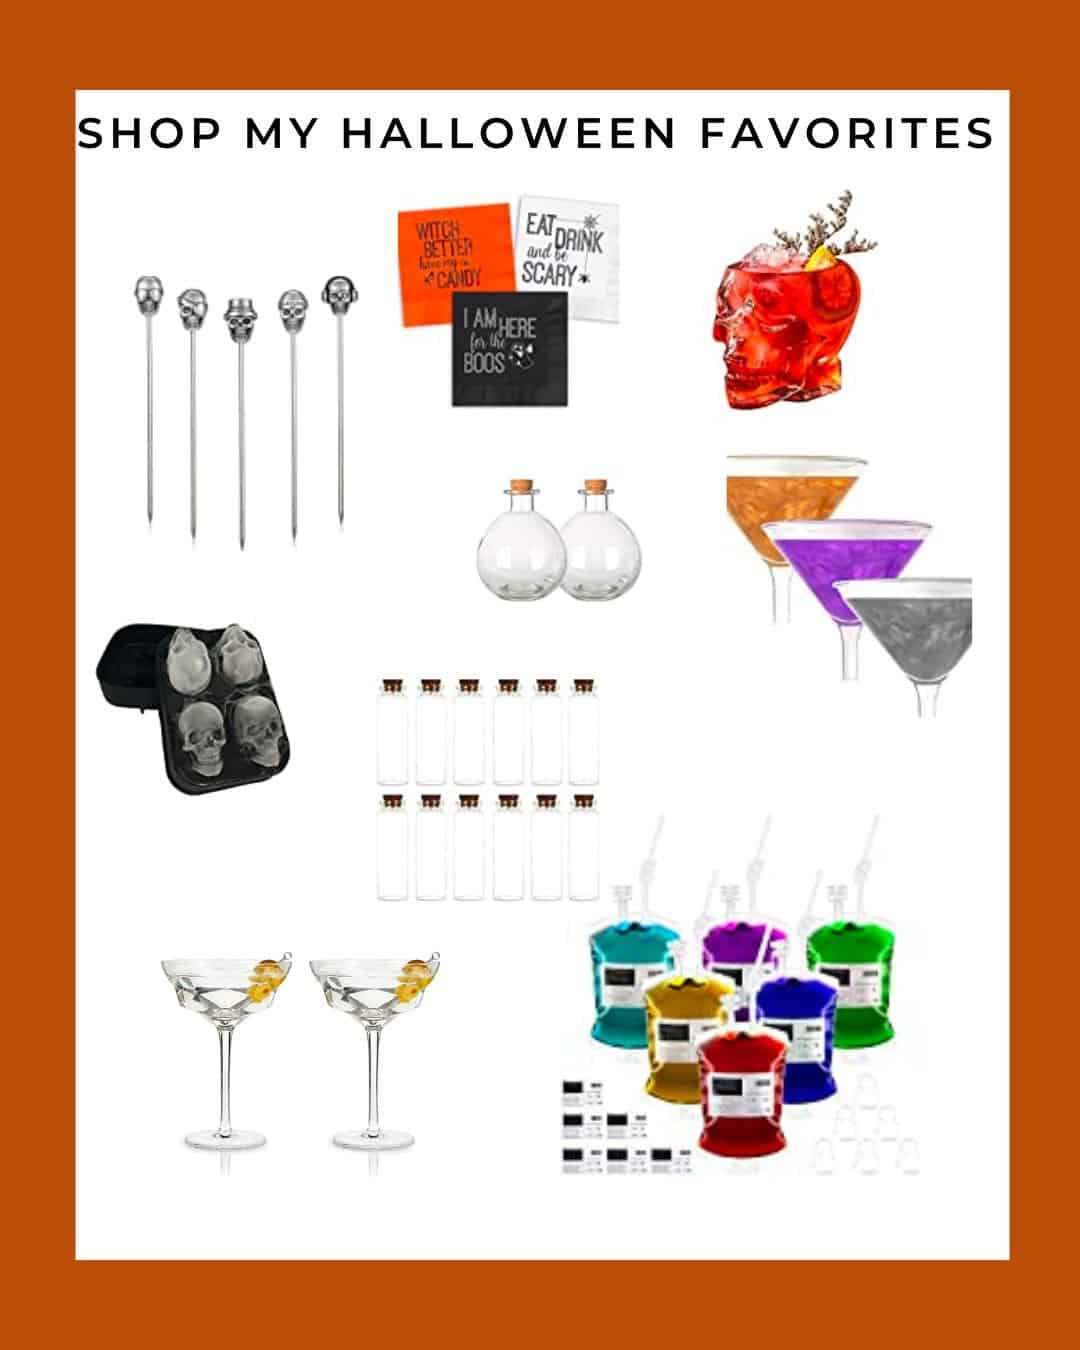 Words say "shop my Halloween favorites" and includes images of skull cocktail glass, Halloween cocktail napkins, martini glasses, glass vial bottles, skull ice mold, skull cocktail picks, and edible glitter.